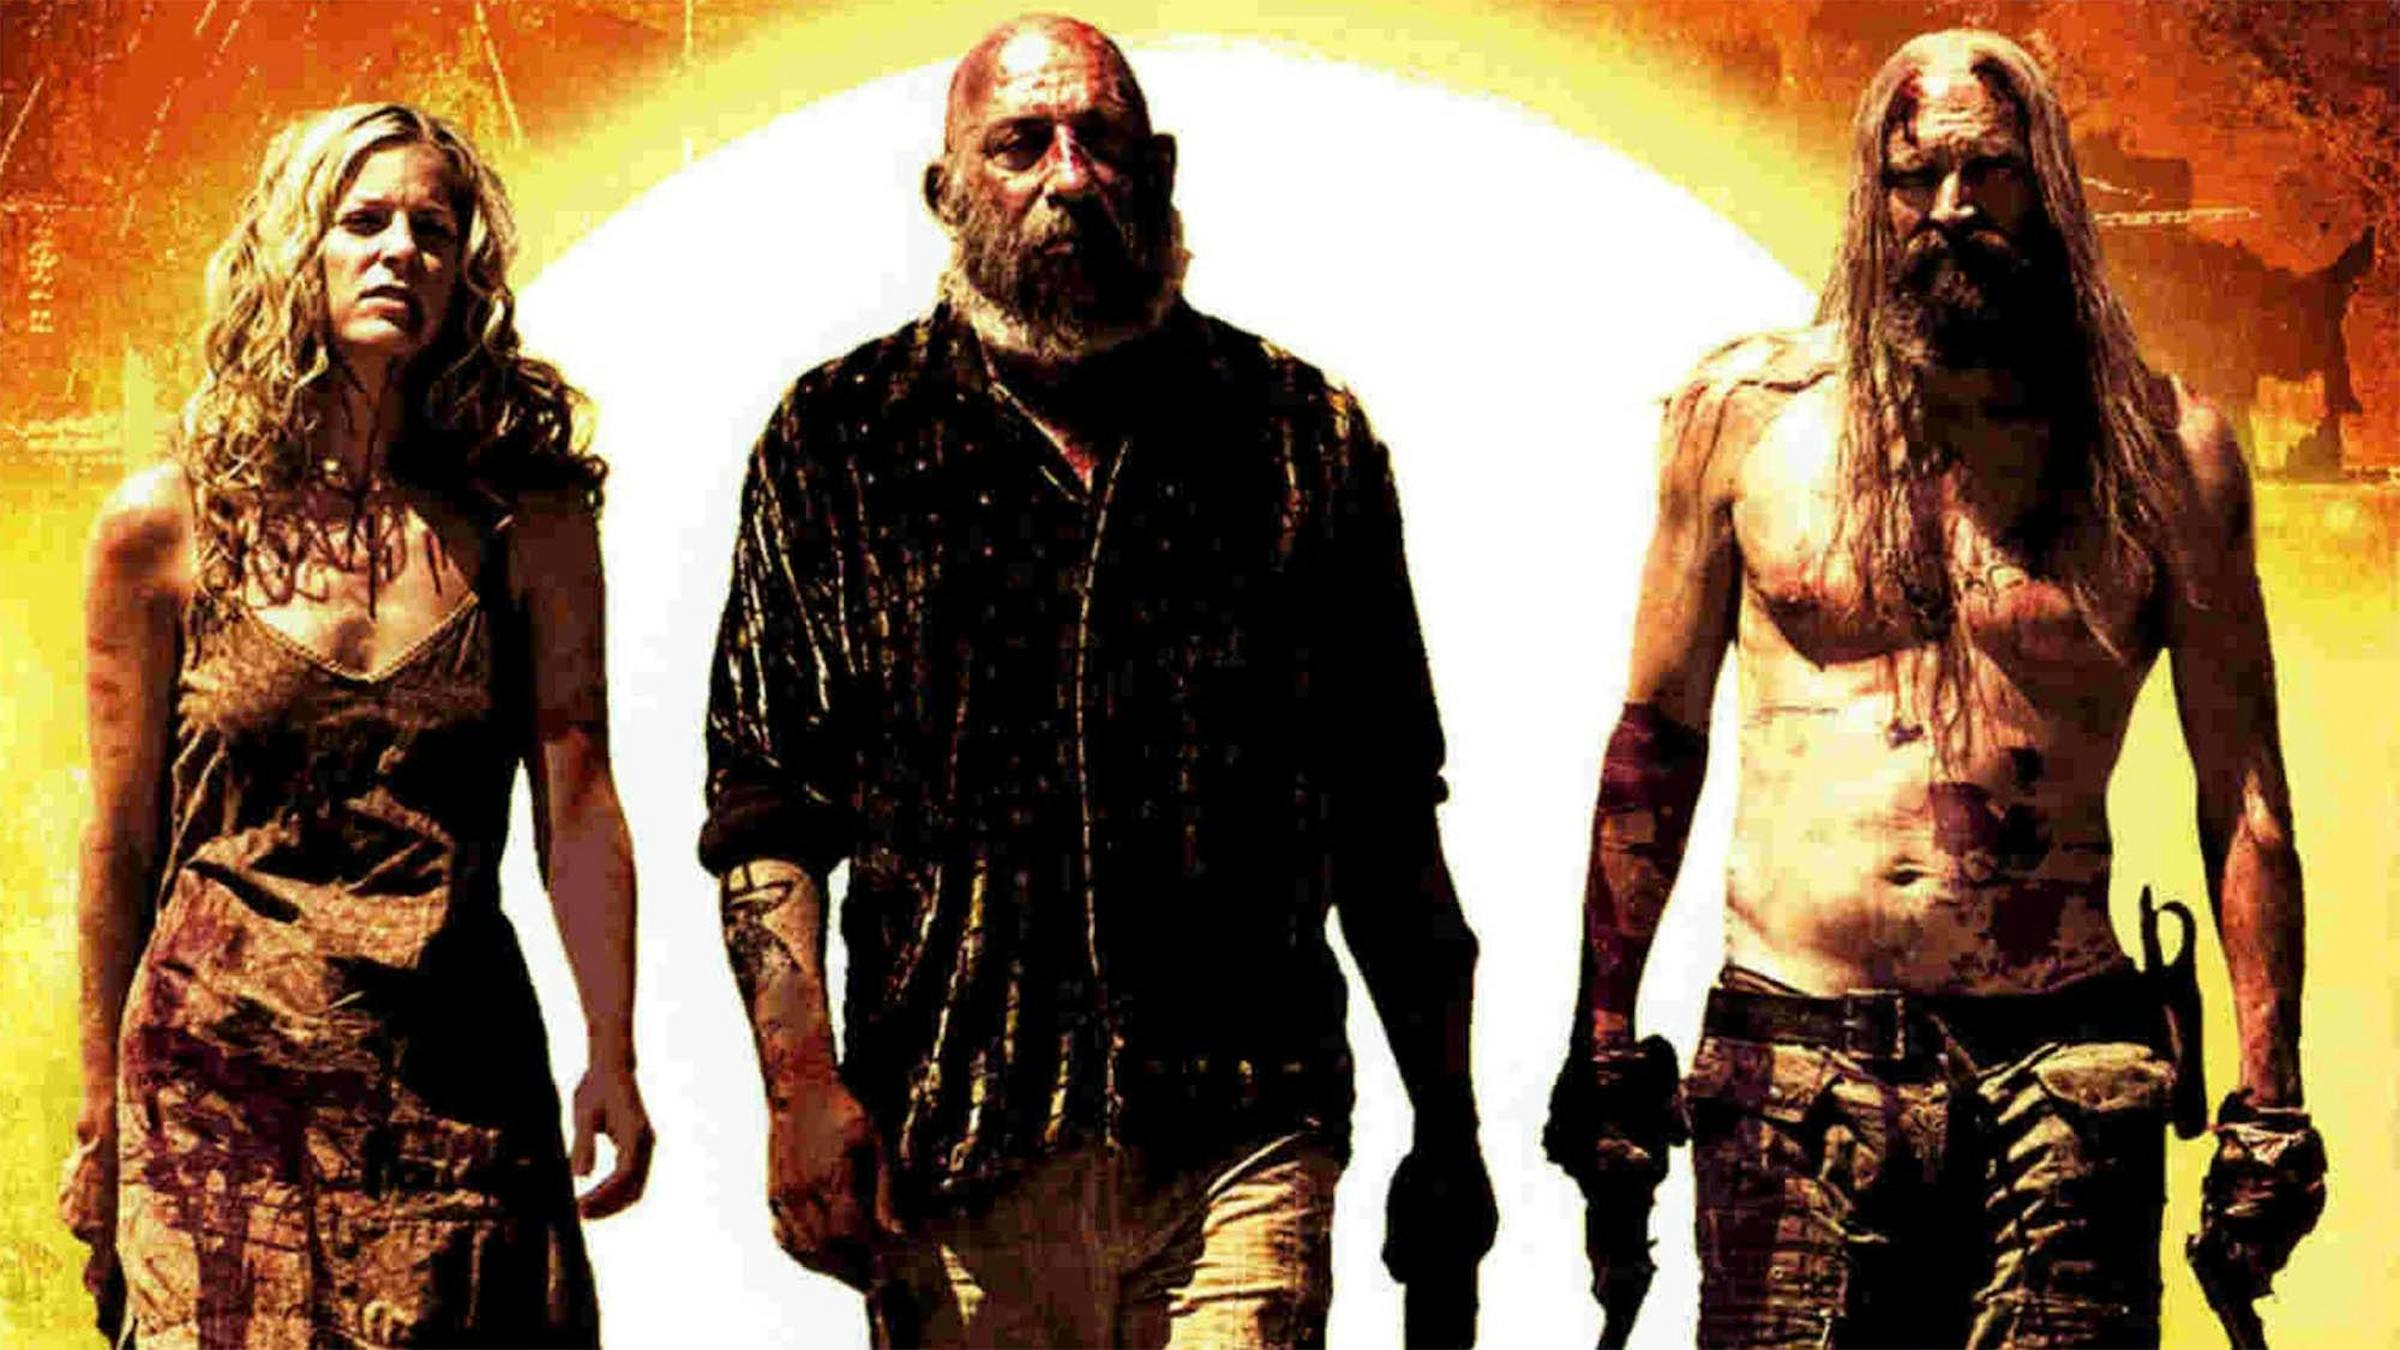 Rob Zombie's New Movie 3 From Hell Features "Many Bizarre Cameos"